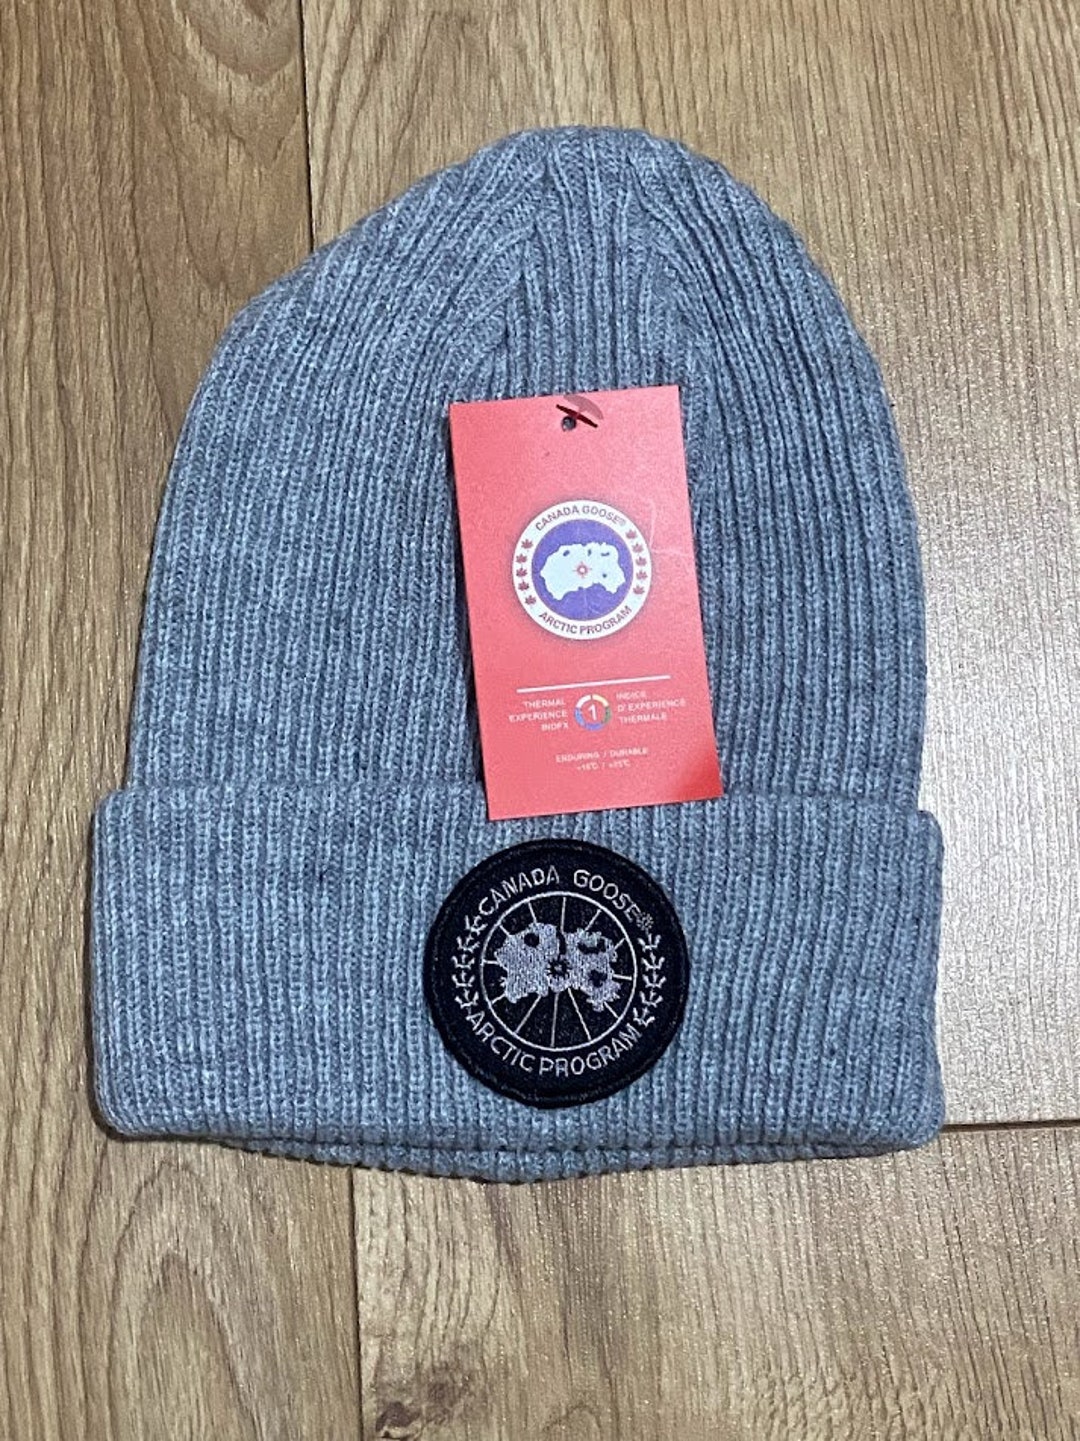 2023 Canada Goose Beanie, 6936M, All Genders, Excelent Quality, Luxury ...